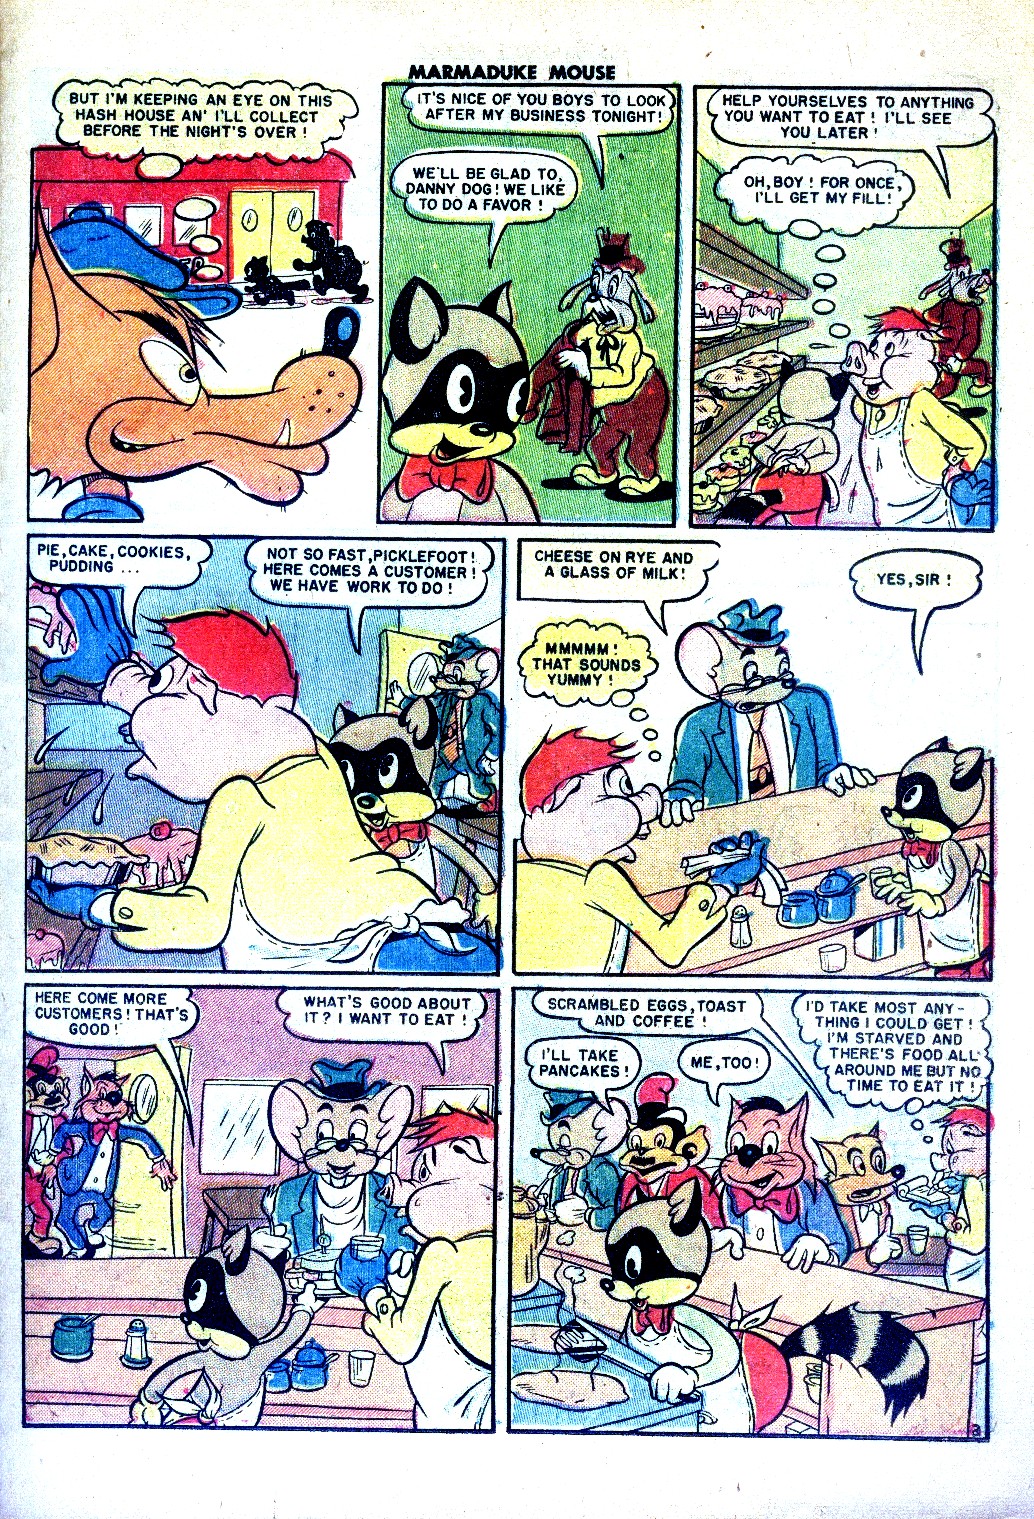 Read online Marmaduke Mouse comic -  Issue #26 - 23